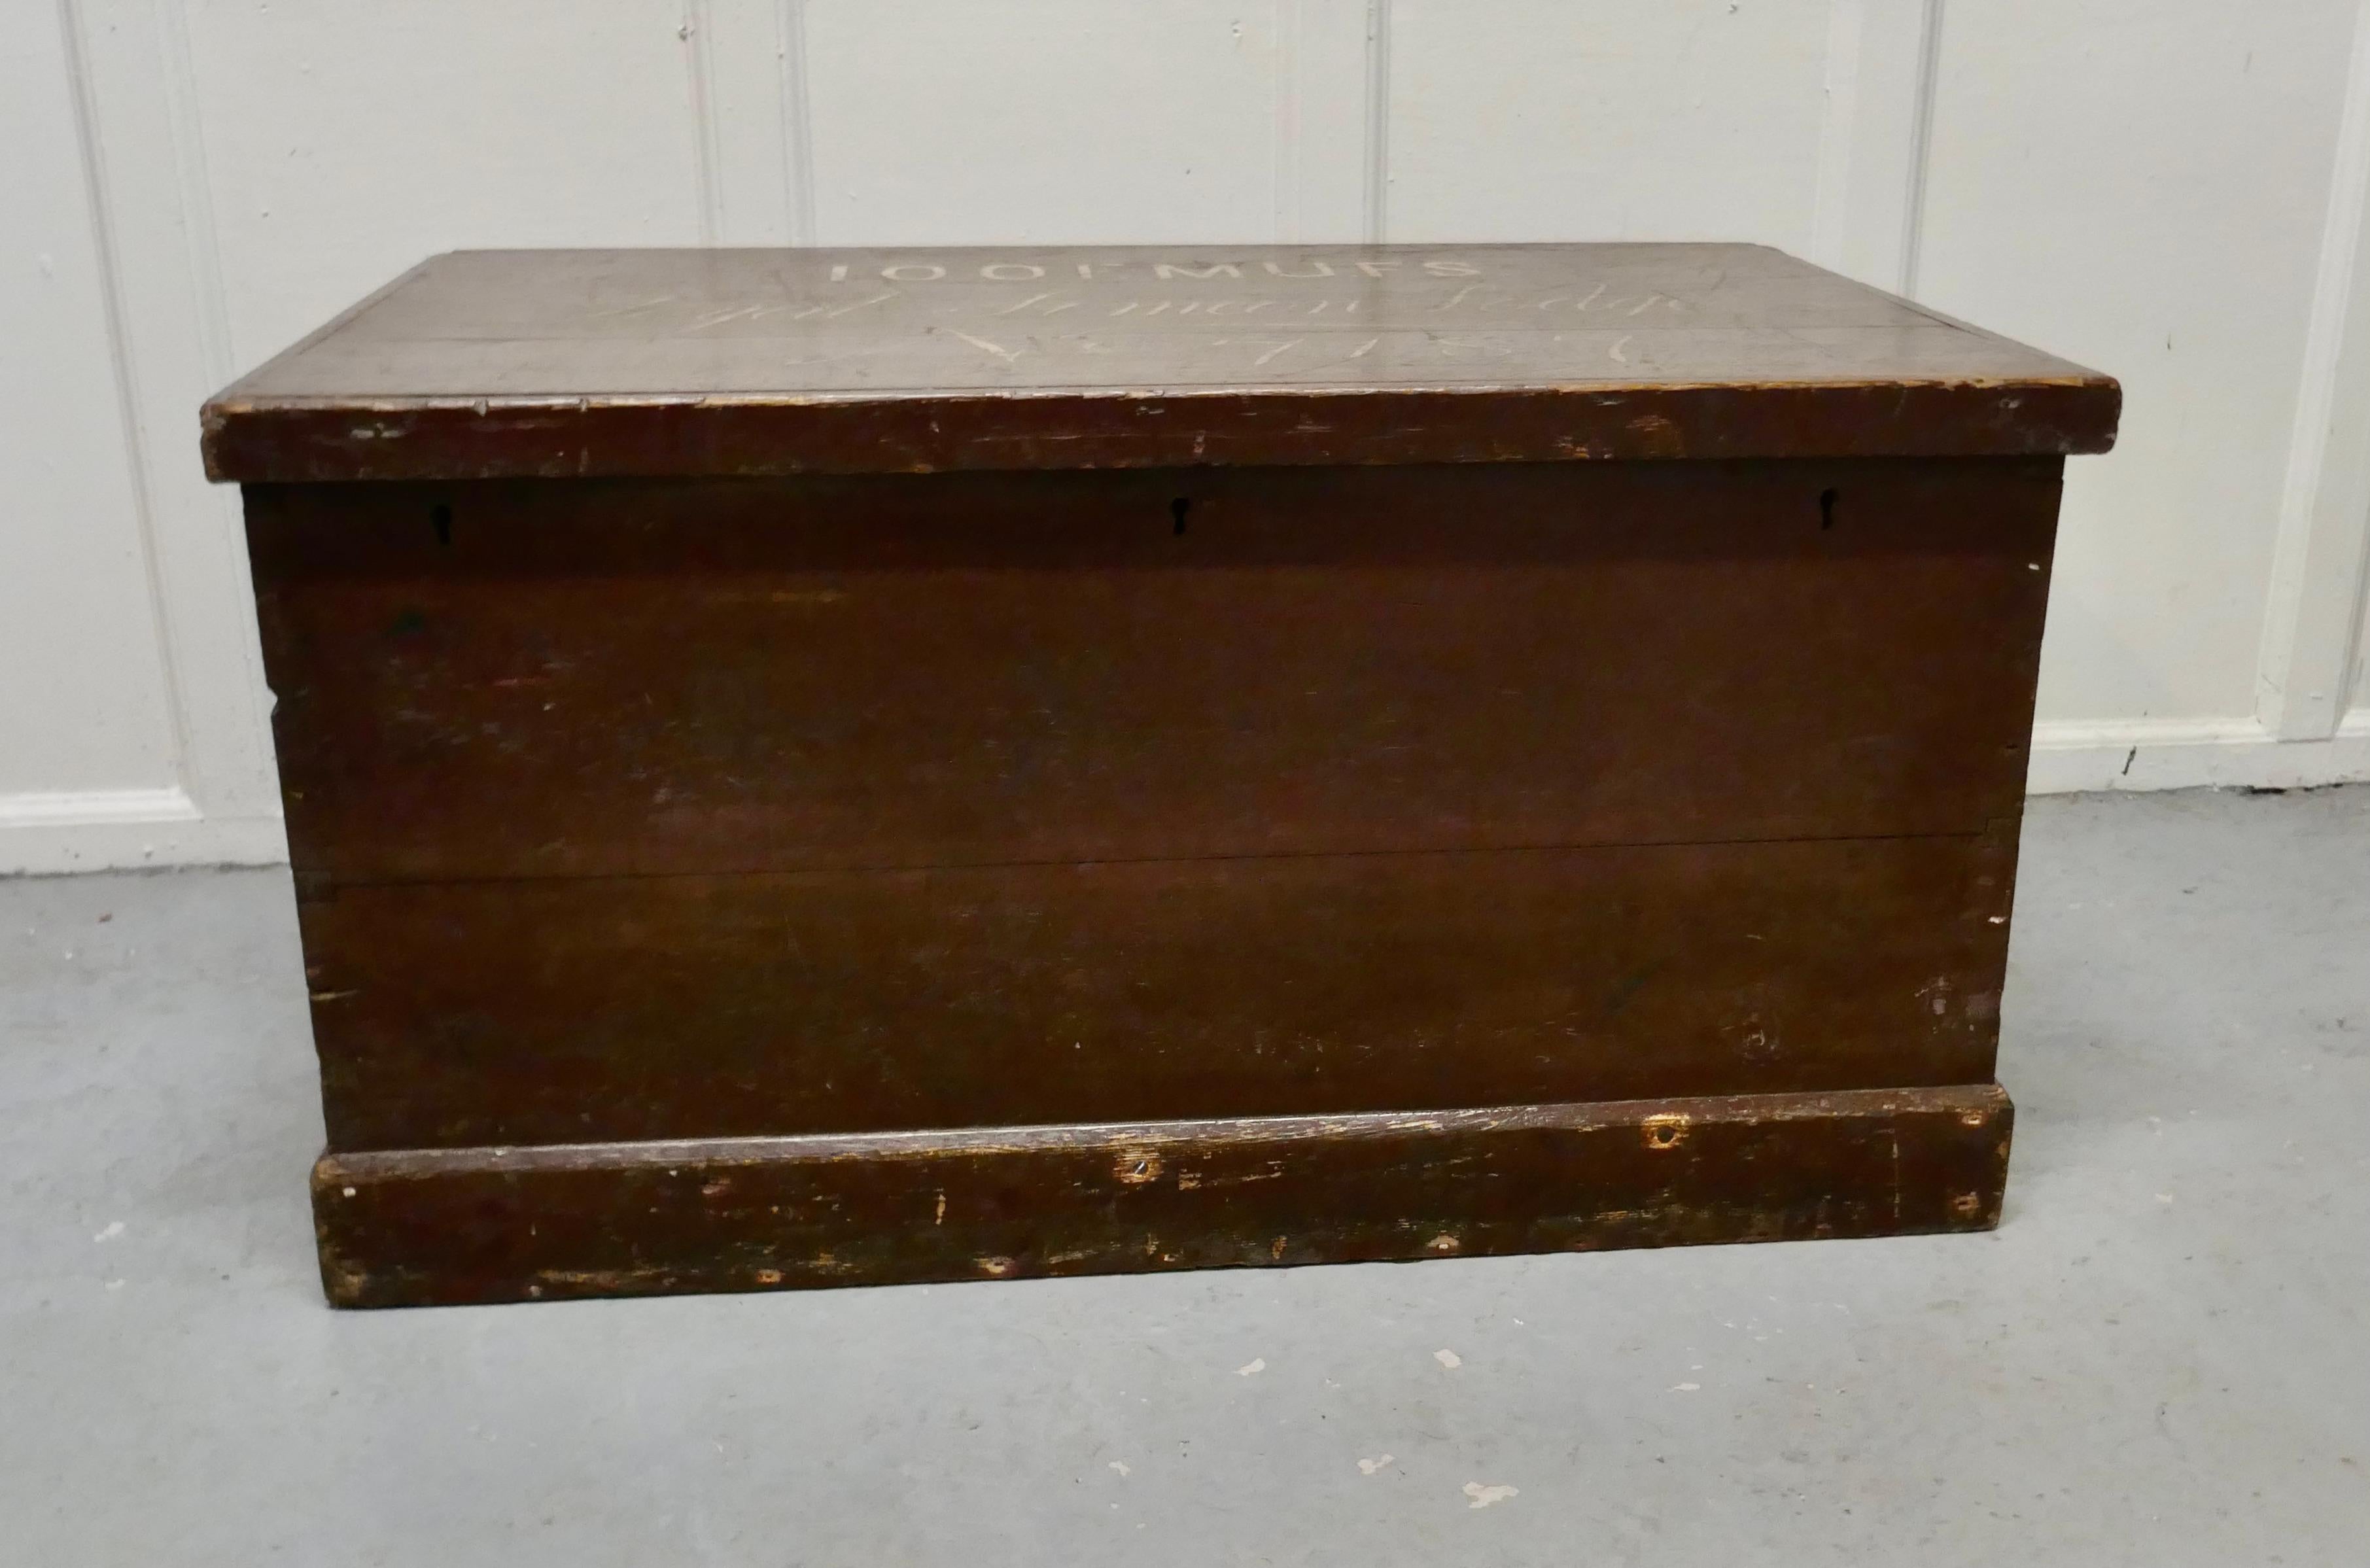 19th Century Masonic Pine Chest 

This is a best quality box, it has an original painted finish with the Loge details painted in script on the top 

The interior is clean, the box is in good used condition blacksmith made strap hinges and carrying